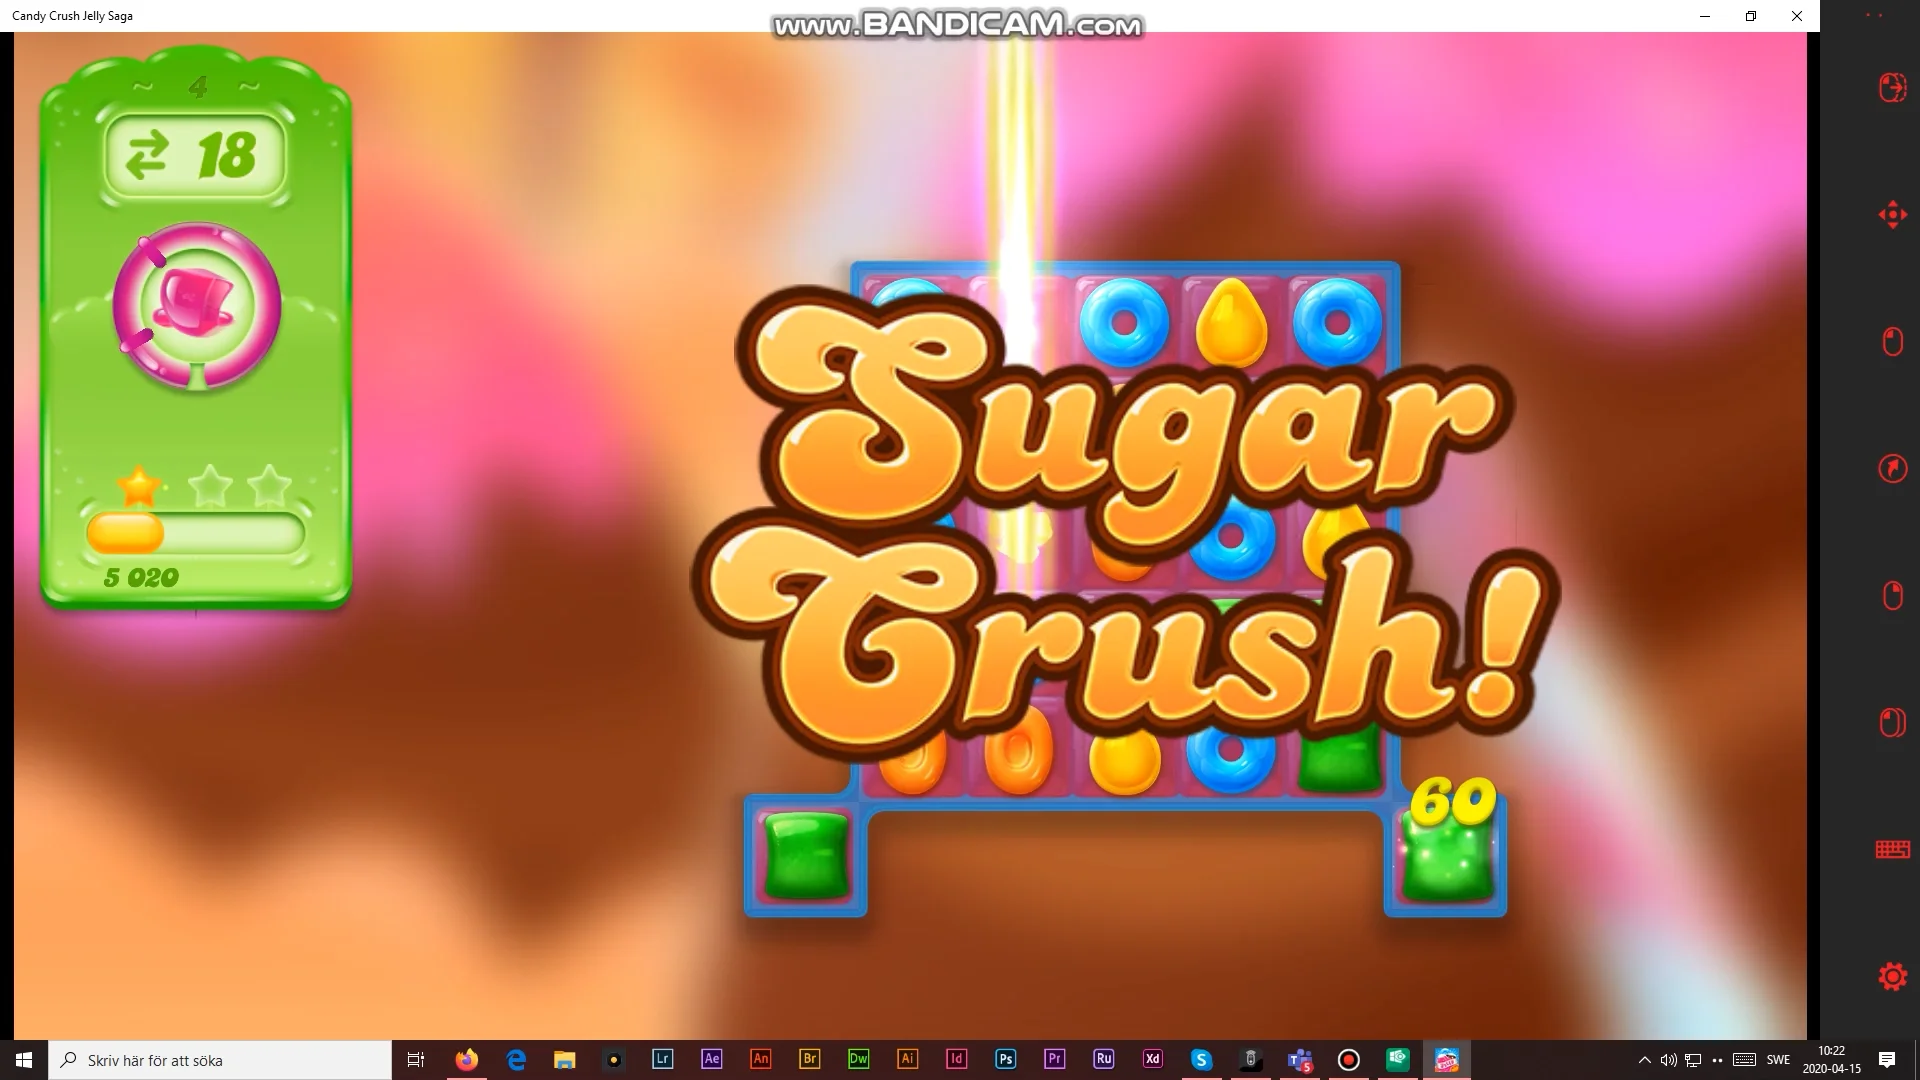 Candy Crush Jelly Saga – Download the game at